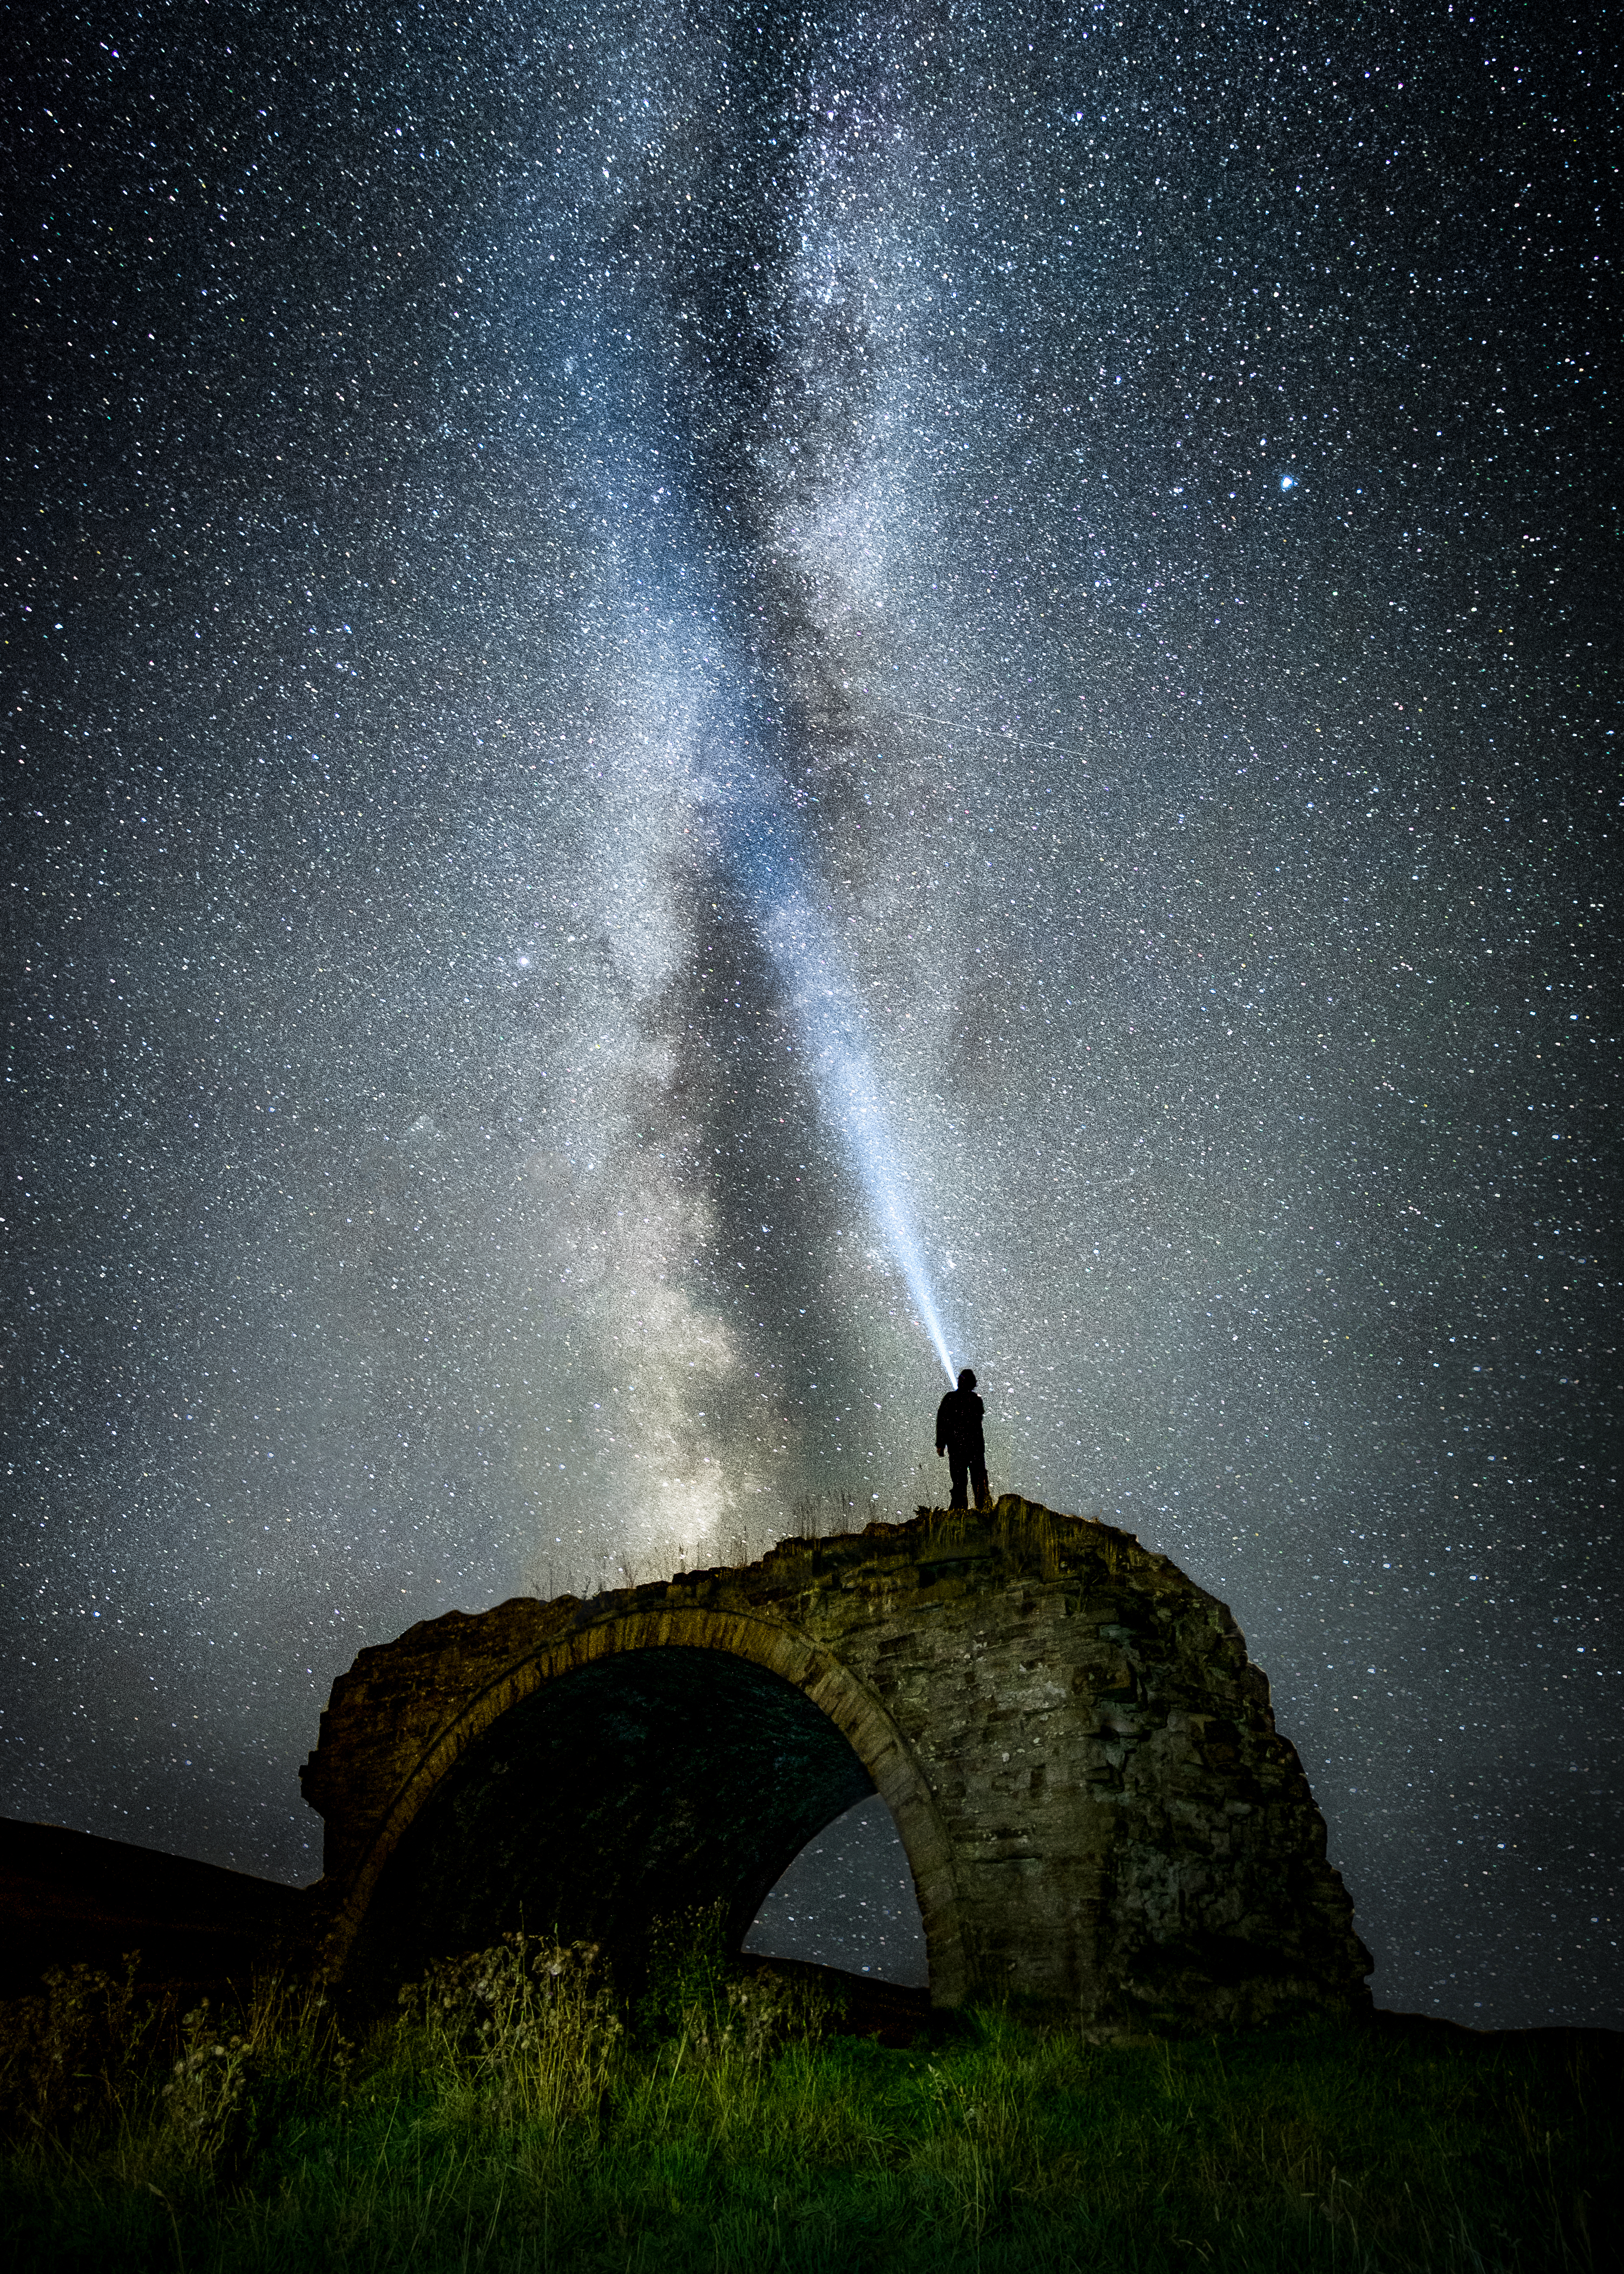 android milky way, night, nature, sky, silhouette, starry sky, human, person, elevation